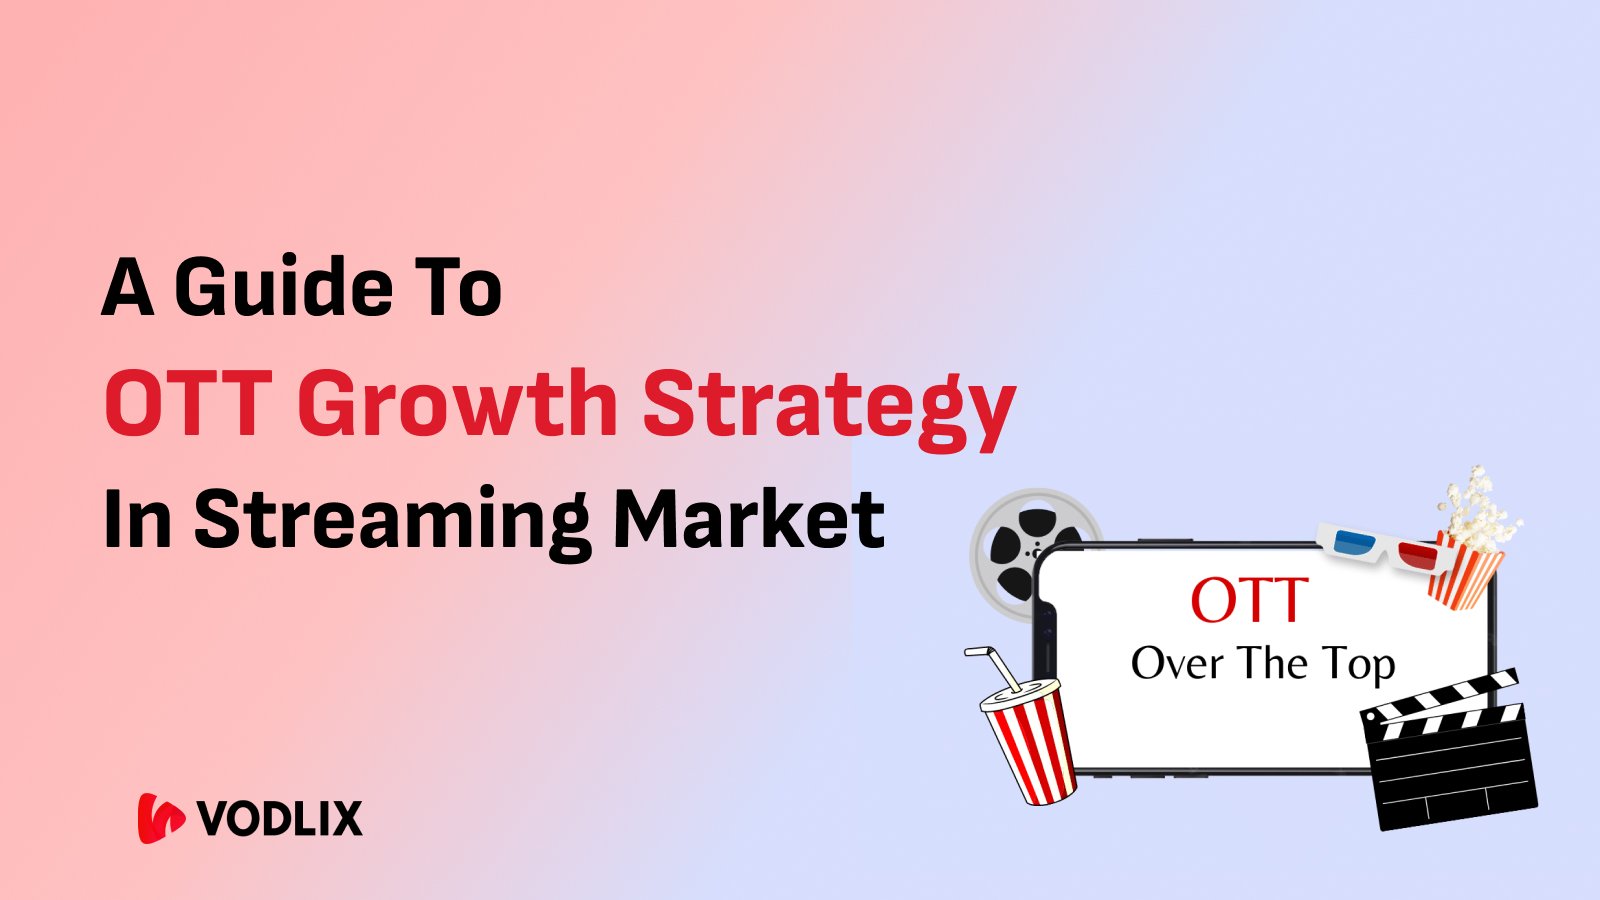 A Guide to OTT Growth Strategy in a Saturated Streaming Market